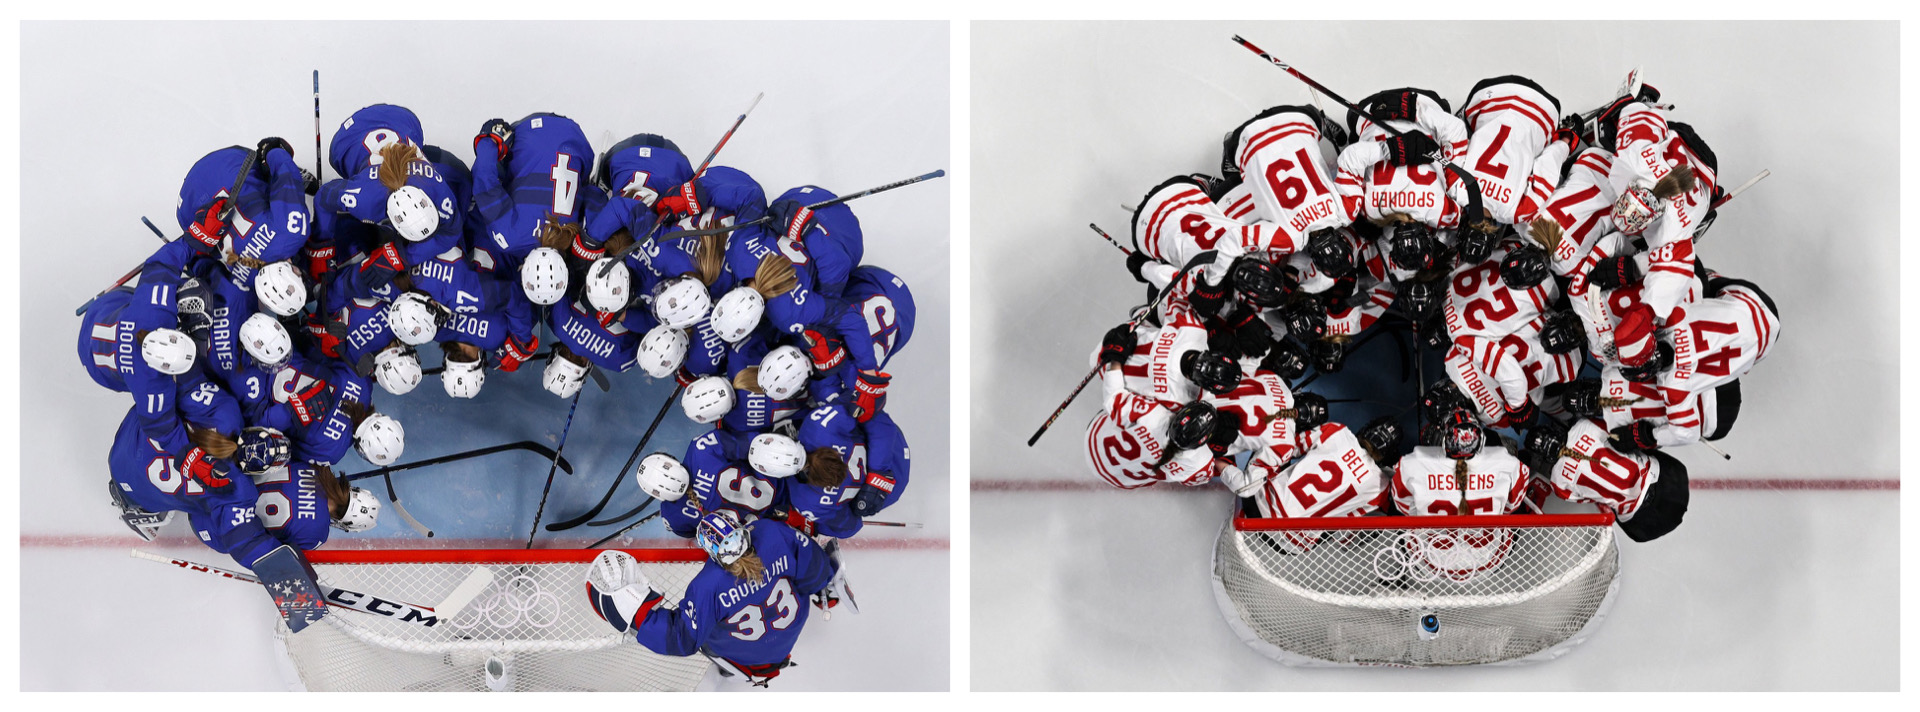 On the left, Team USA is huddled in their goal crease. On the right, Hockey Canada is huddled in their goal crease.